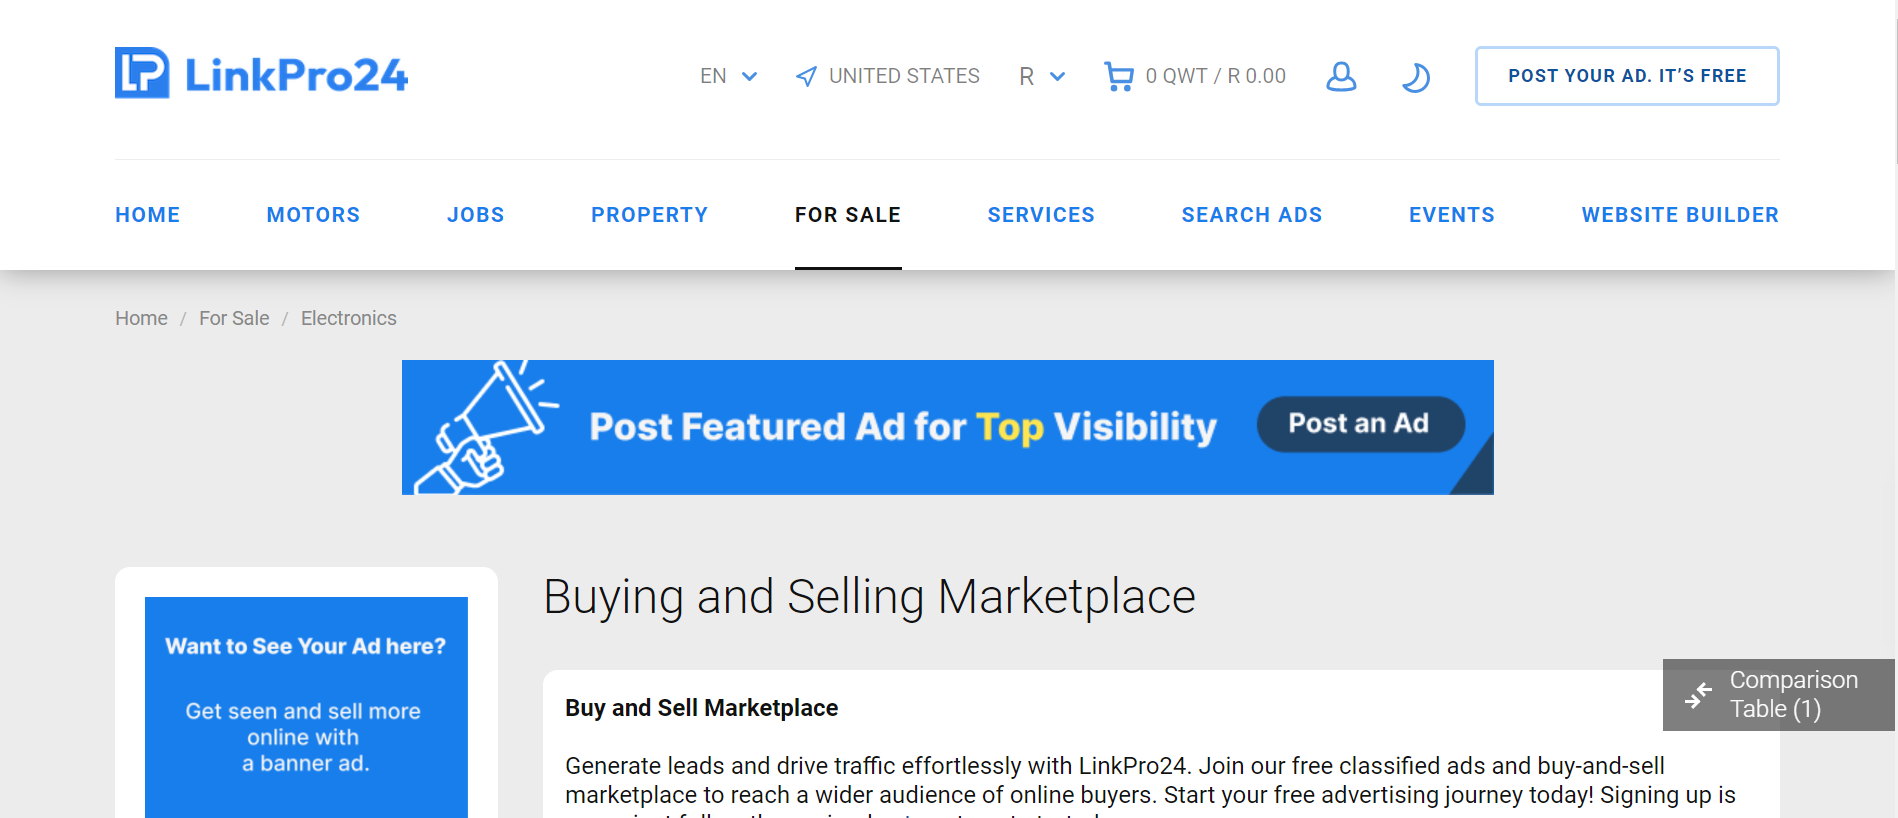 Buy and sell marketplace - LinkPro24 America > Free classifieds